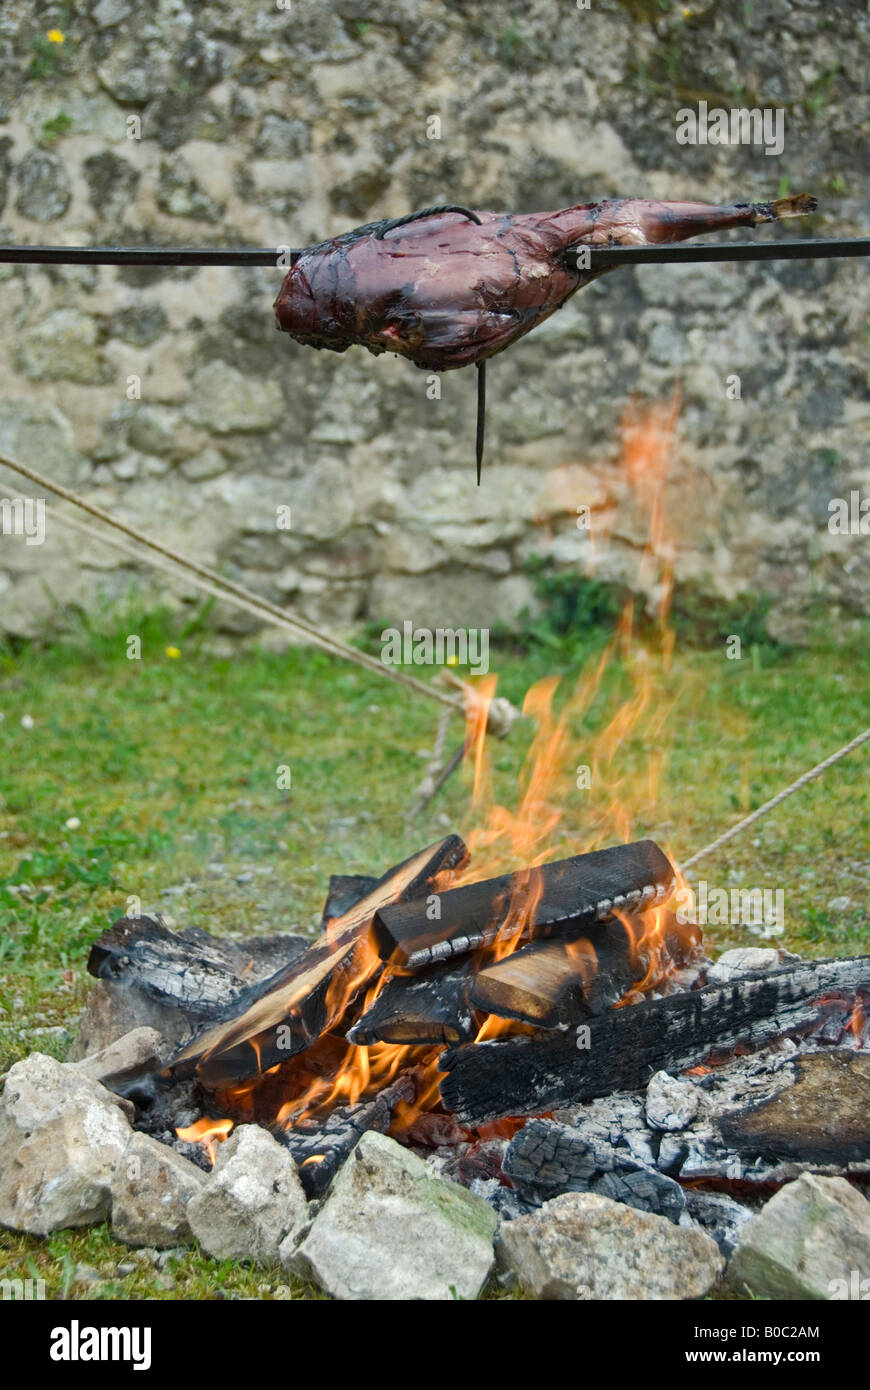 Stock photo of a piece of meat spit roasting over an open fire Stock Photo